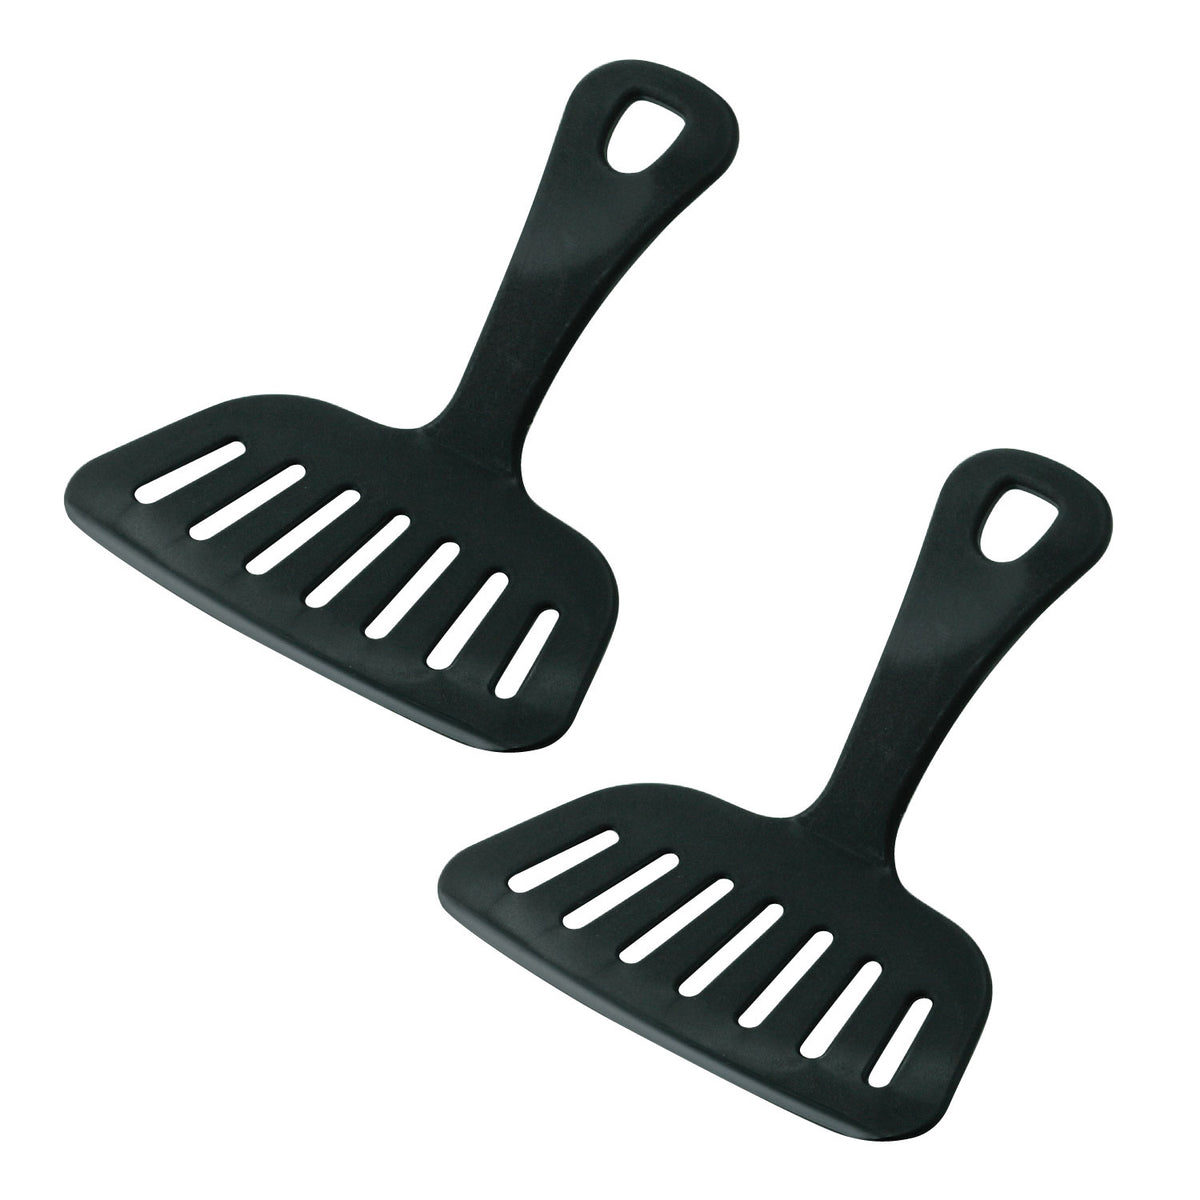 KITCHEN AID 2 Piece Tool Set Short Turner And Slotted Spoon (Black)